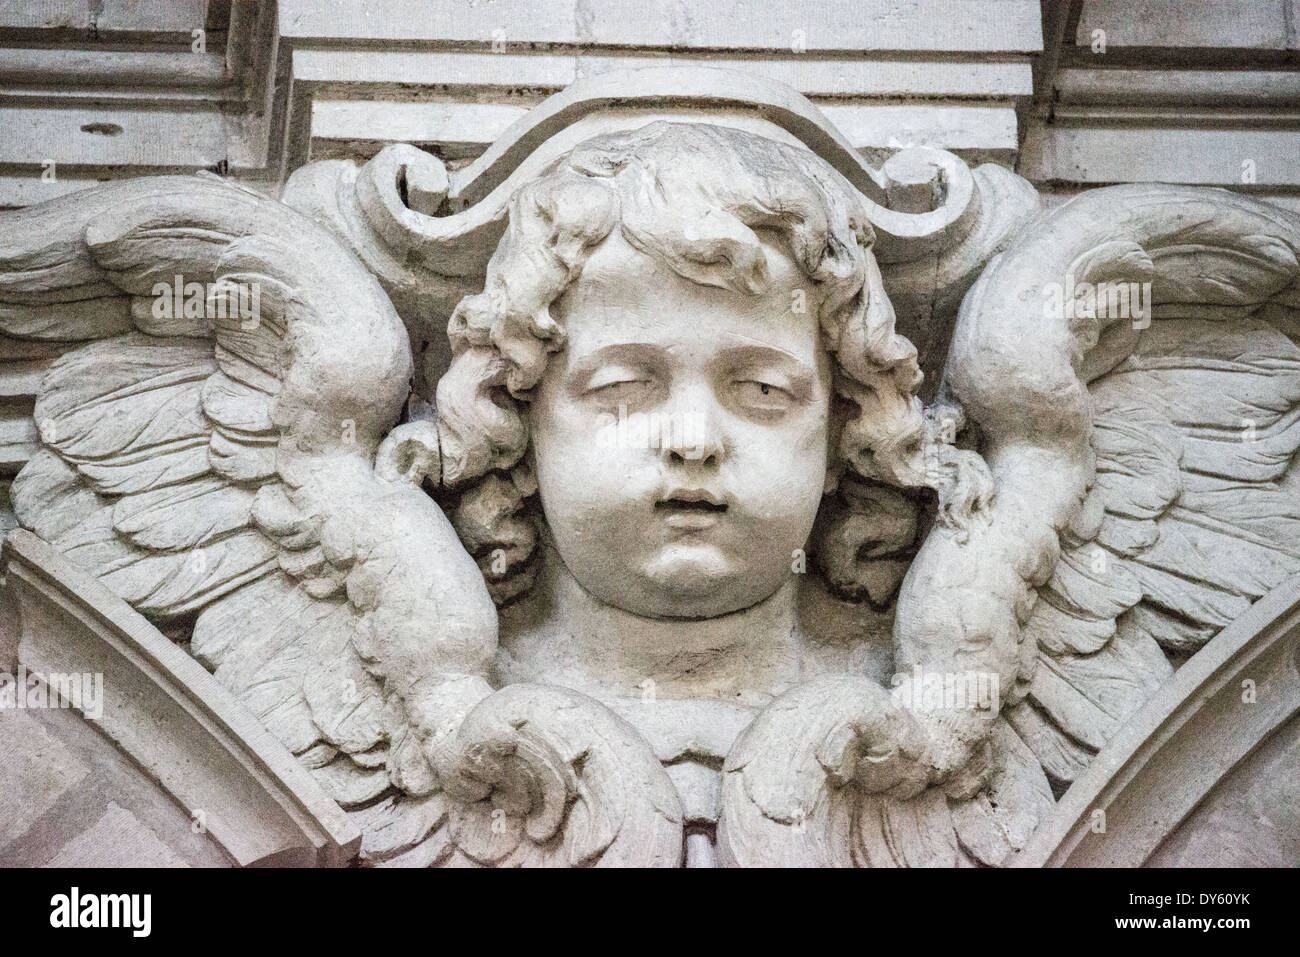 BRUSSELS, Belgium — A cherub atop one of the internal columns at the Church of Saint John the Baptist at the Béguinage, 17th century Flemish Baroque style Roman Catholic Church in central Brussels, Belgium. It was originally part of the beguinage Notre-Dame de la Vigne. Stock Photo